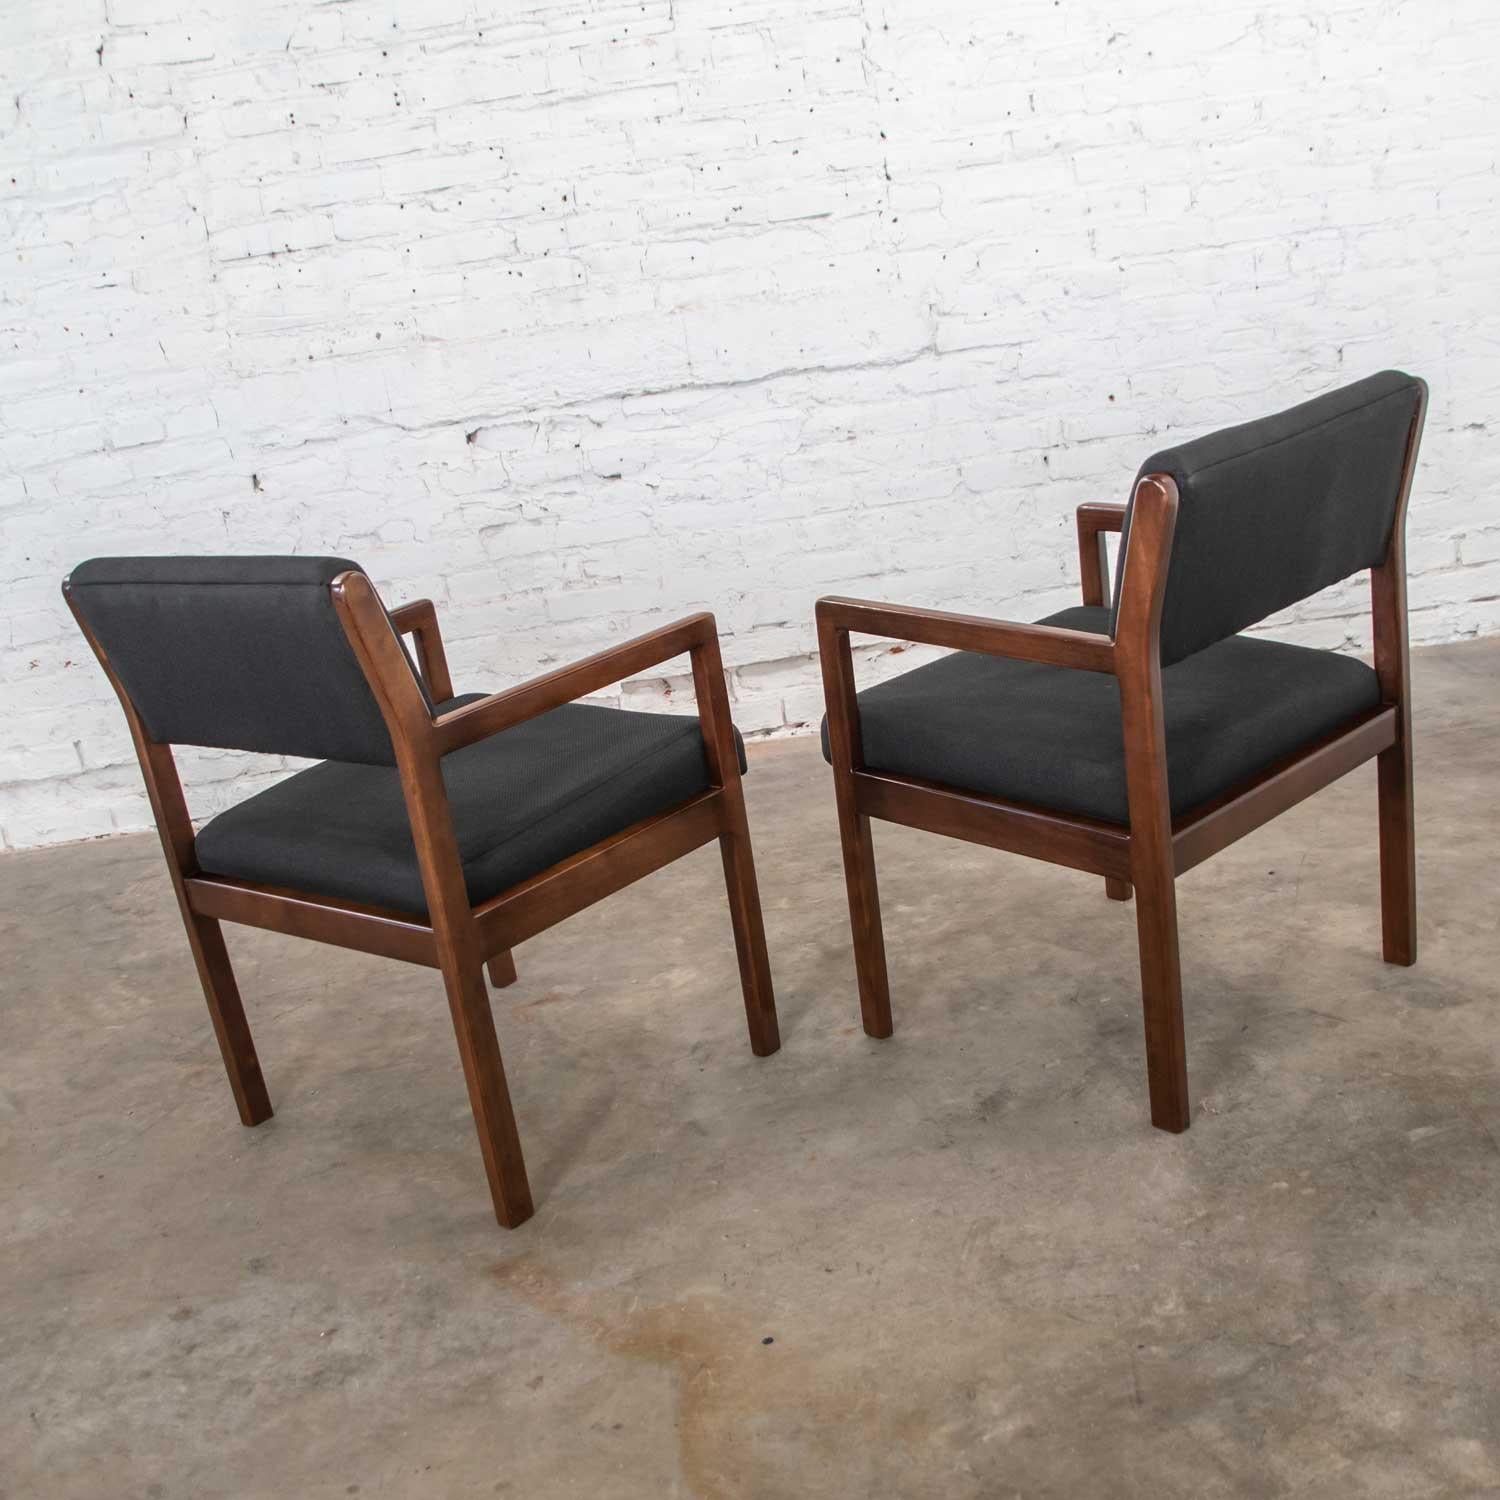 Modern Pair of Black and Walnut Tone Wood Accent or Dining Armchairs by Haworth For Sale 3